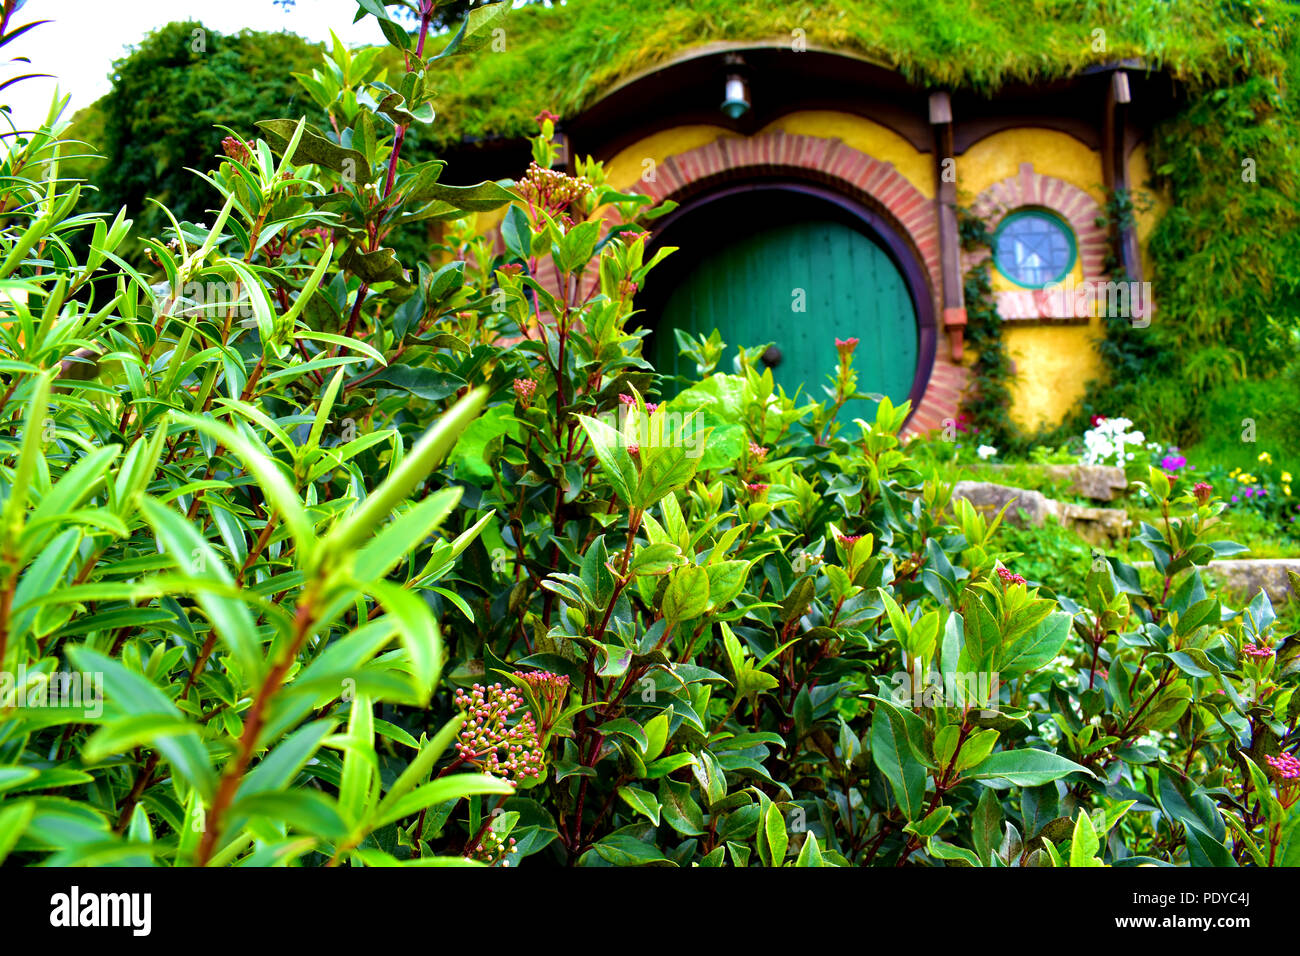 Hobbiton and Bilbo's house (Bag End). The door of the Hobbit's hole. Stock Photo